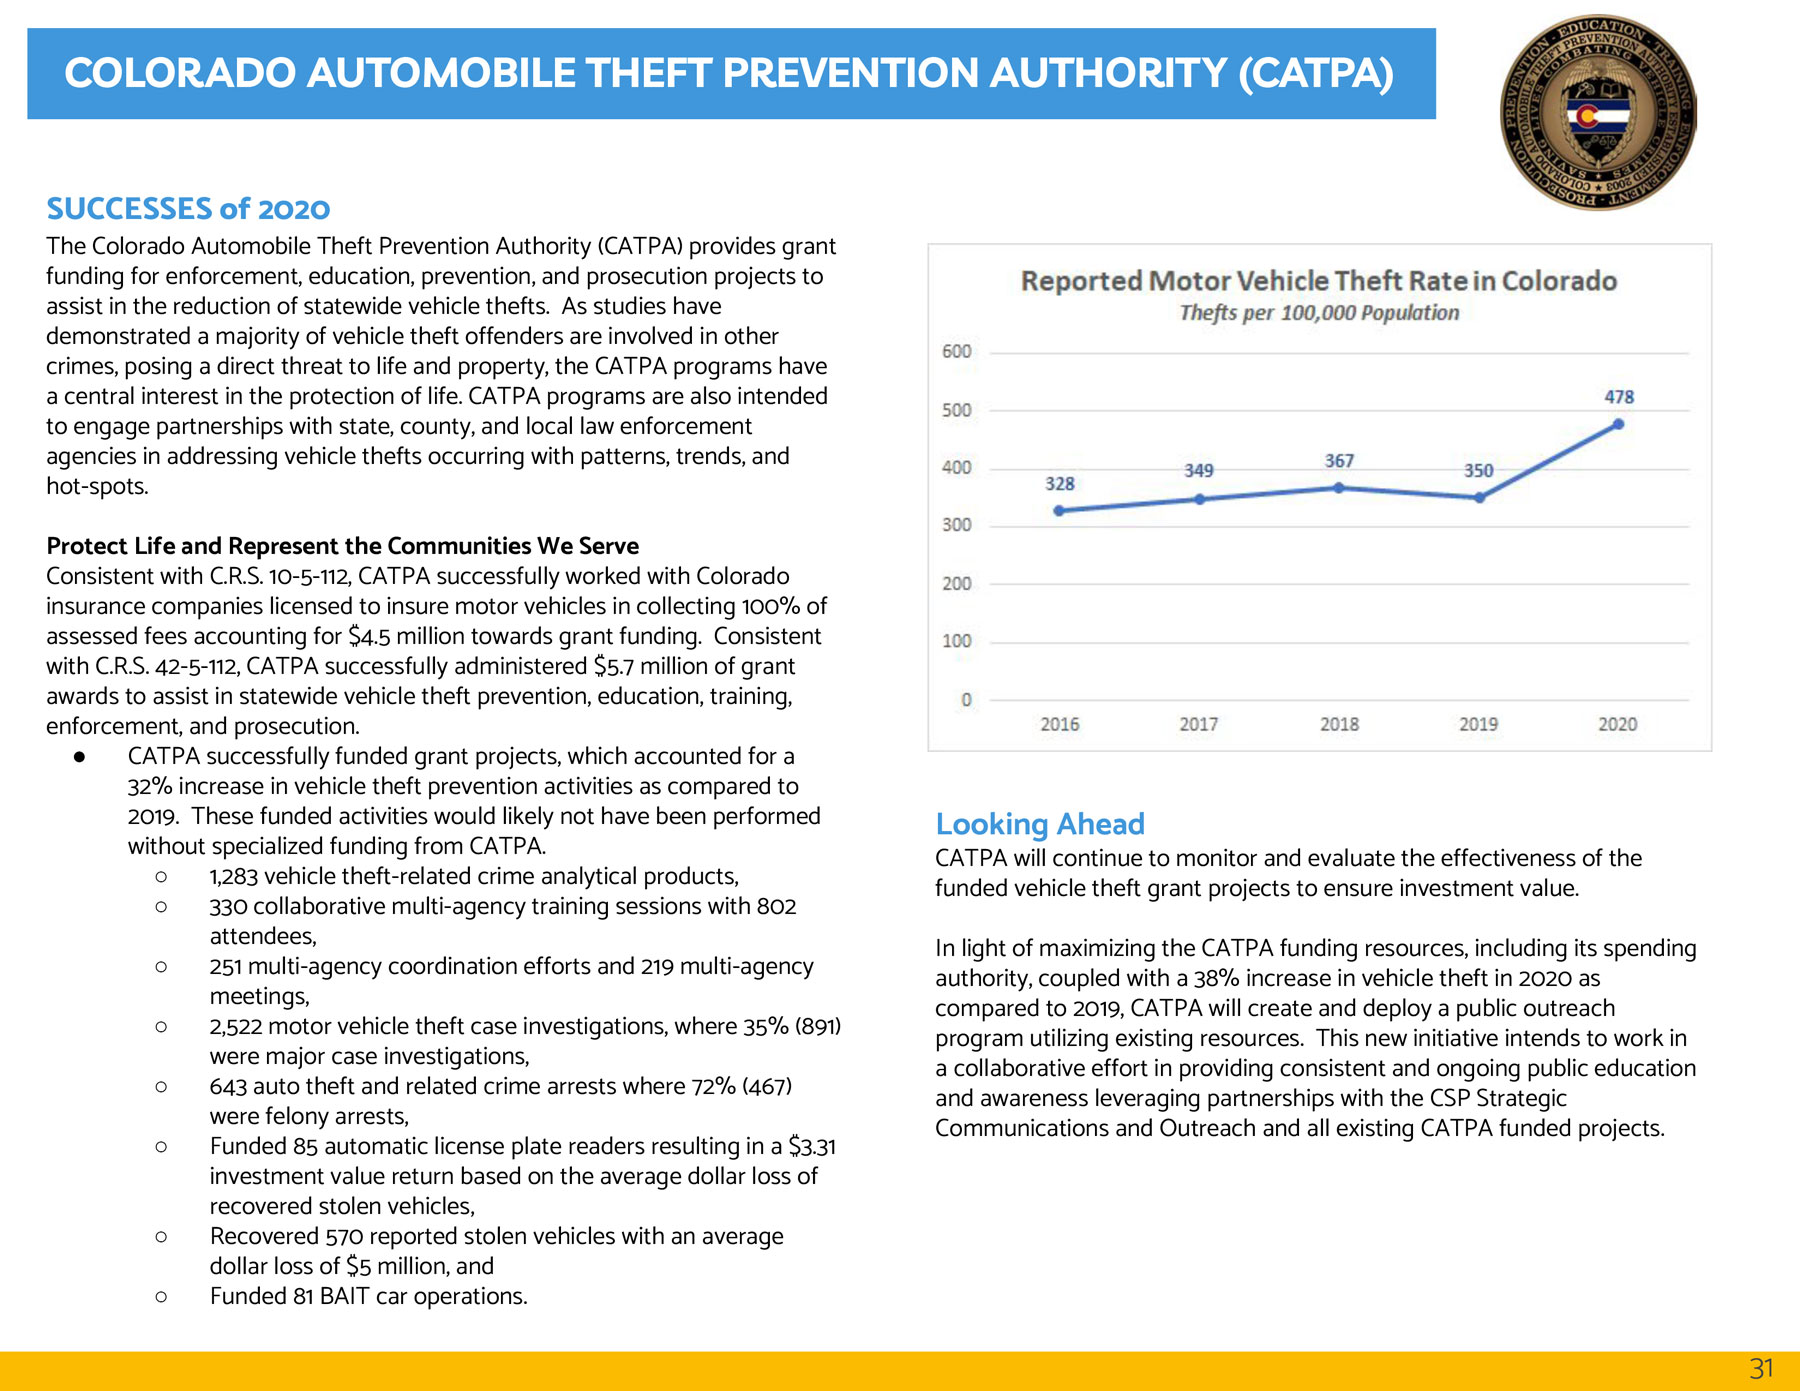 Photo of annual report showing auto theft trend graph.